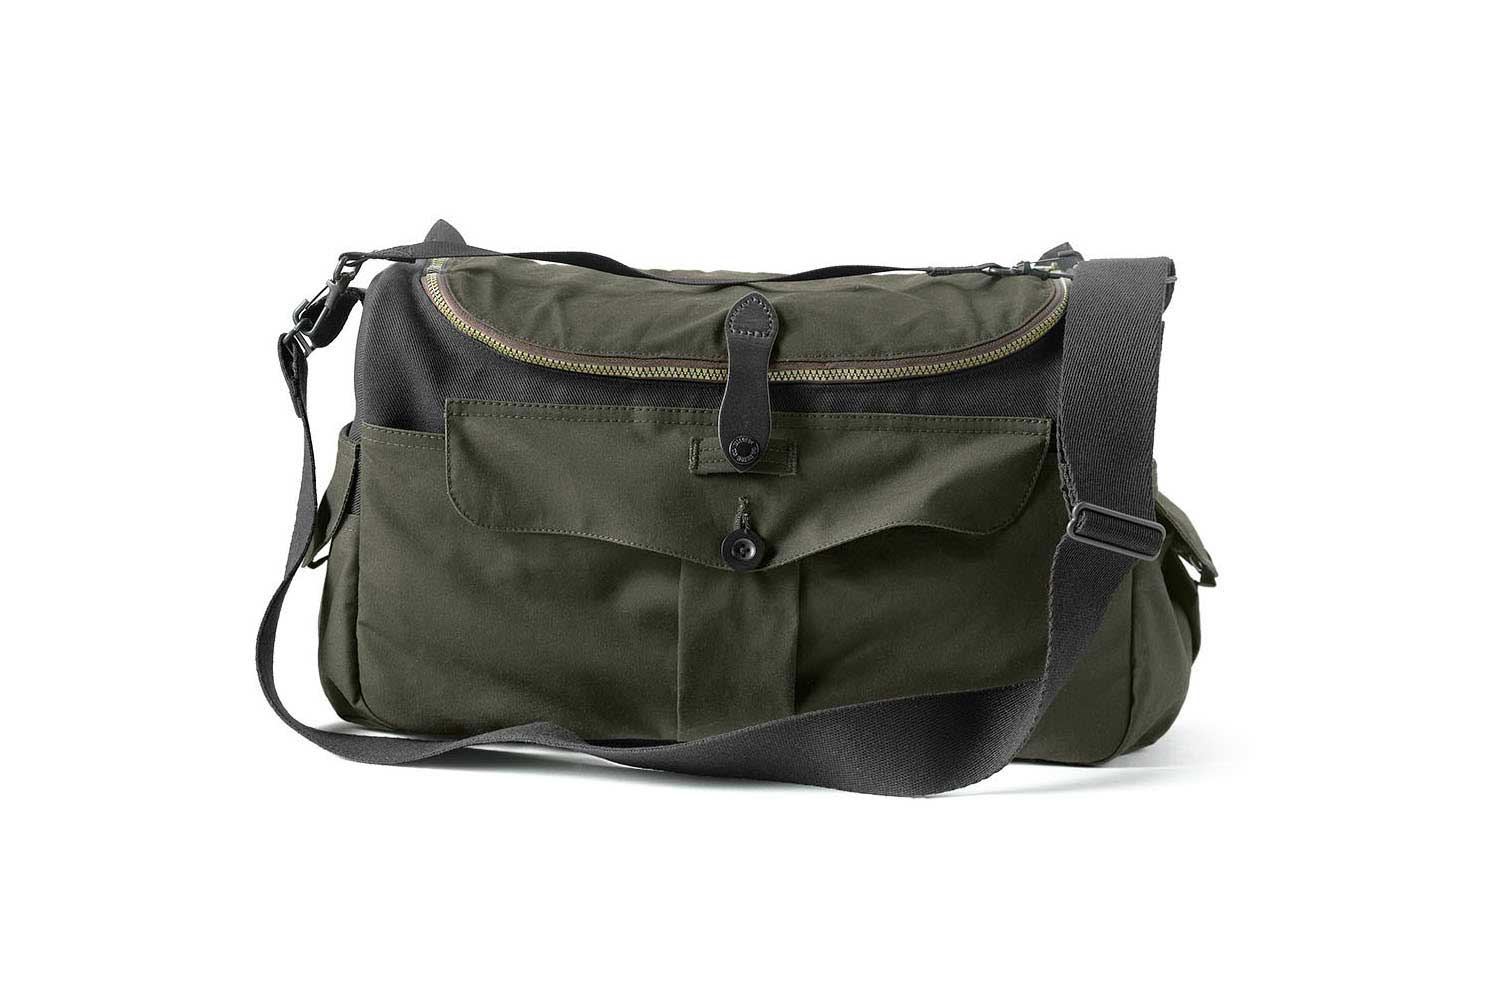 The McCurry Sportsman Bag